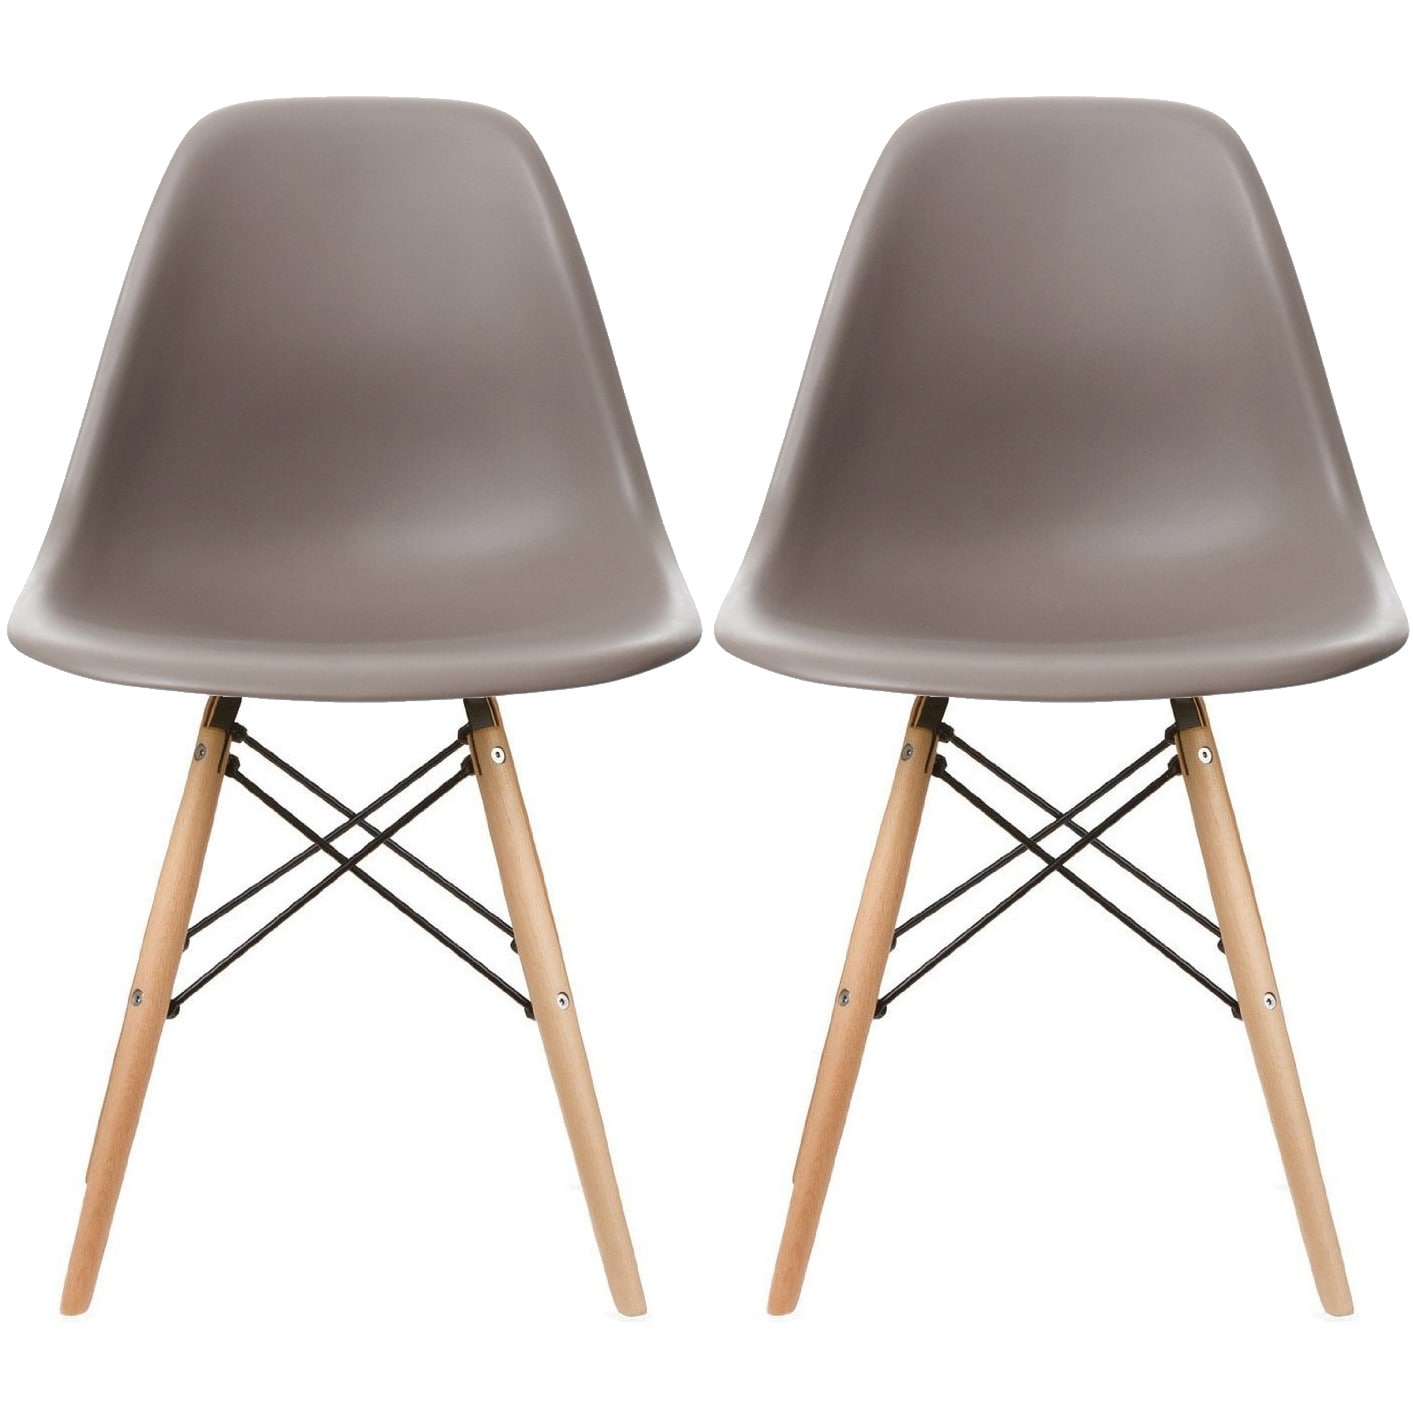 Set of 1 Dining Eiffel Chair Retro Solid Wood Legs Lounge Plastic Chair Living 